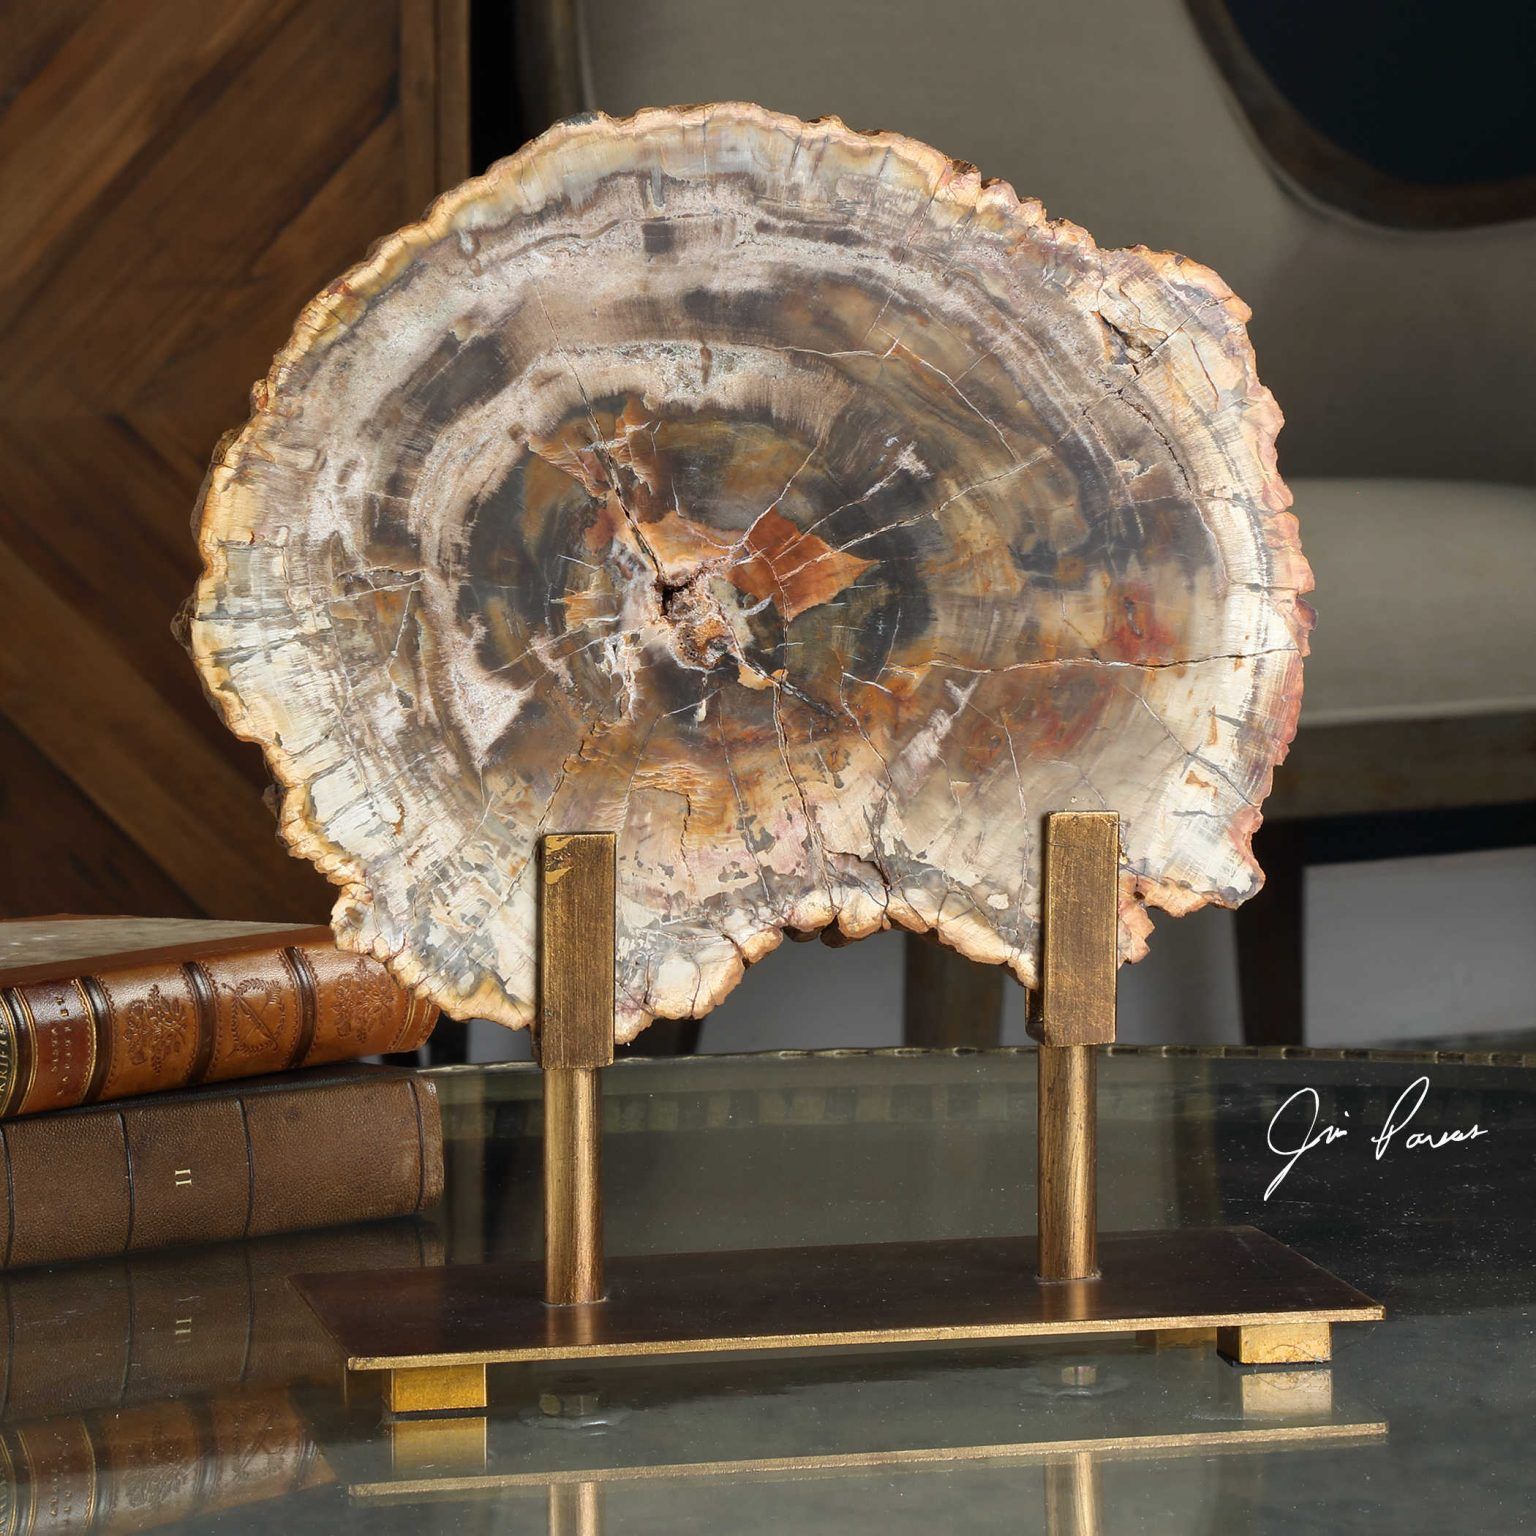 Petrified wood decor compliments the granny chic style